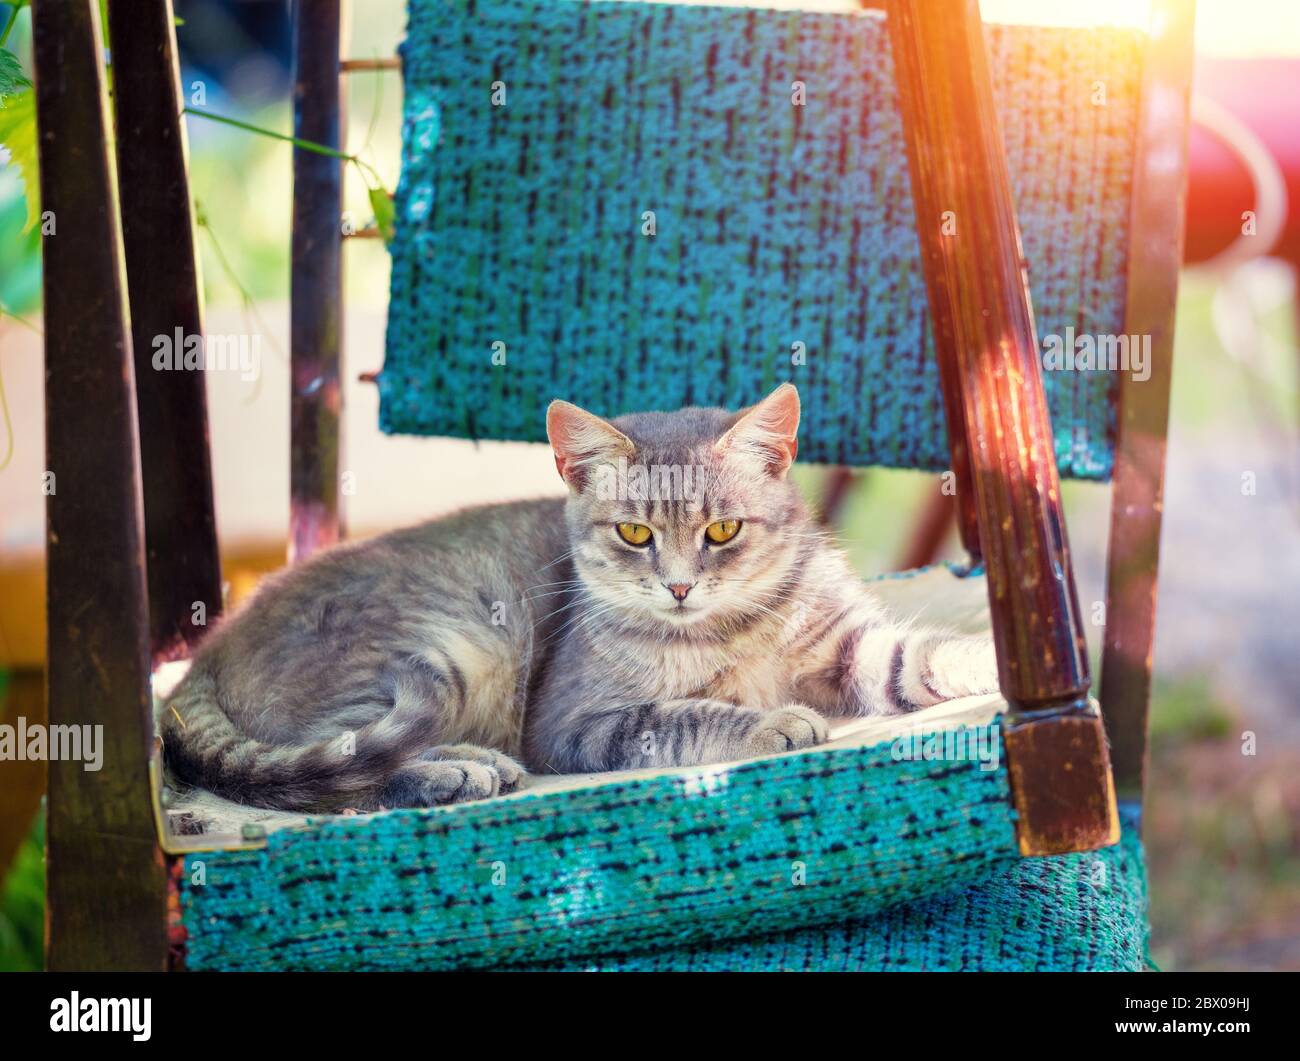 The cat was lying on an upside down chair in the garden Stock Photo